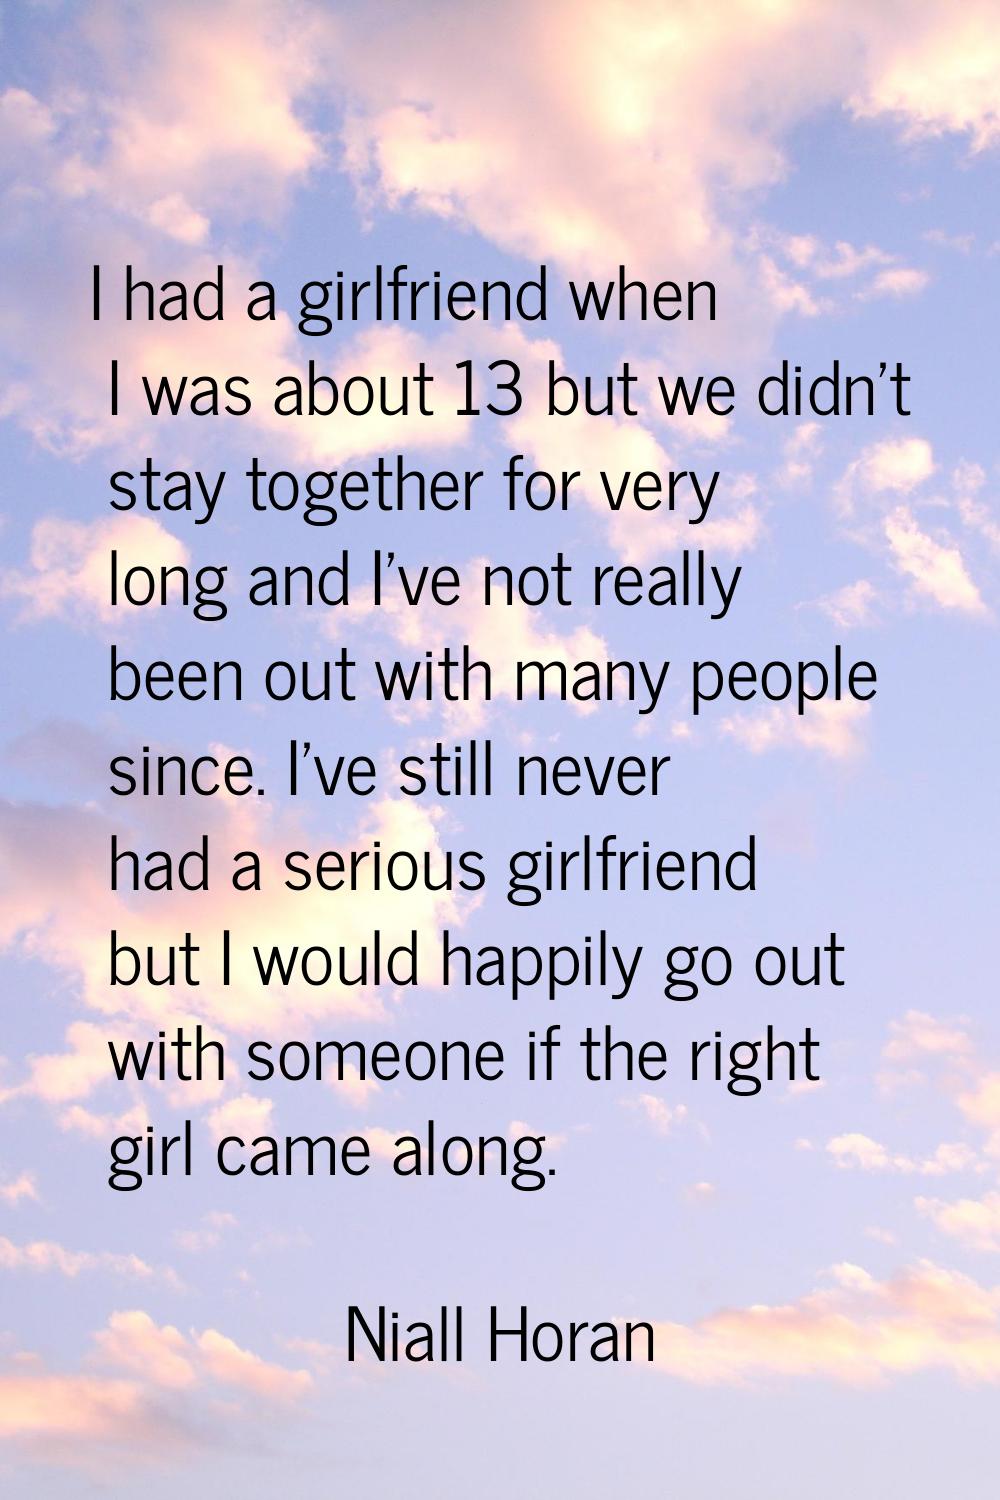 I had a girlfriend when I was about 13 but we didn't stay together for very long and I've not reall